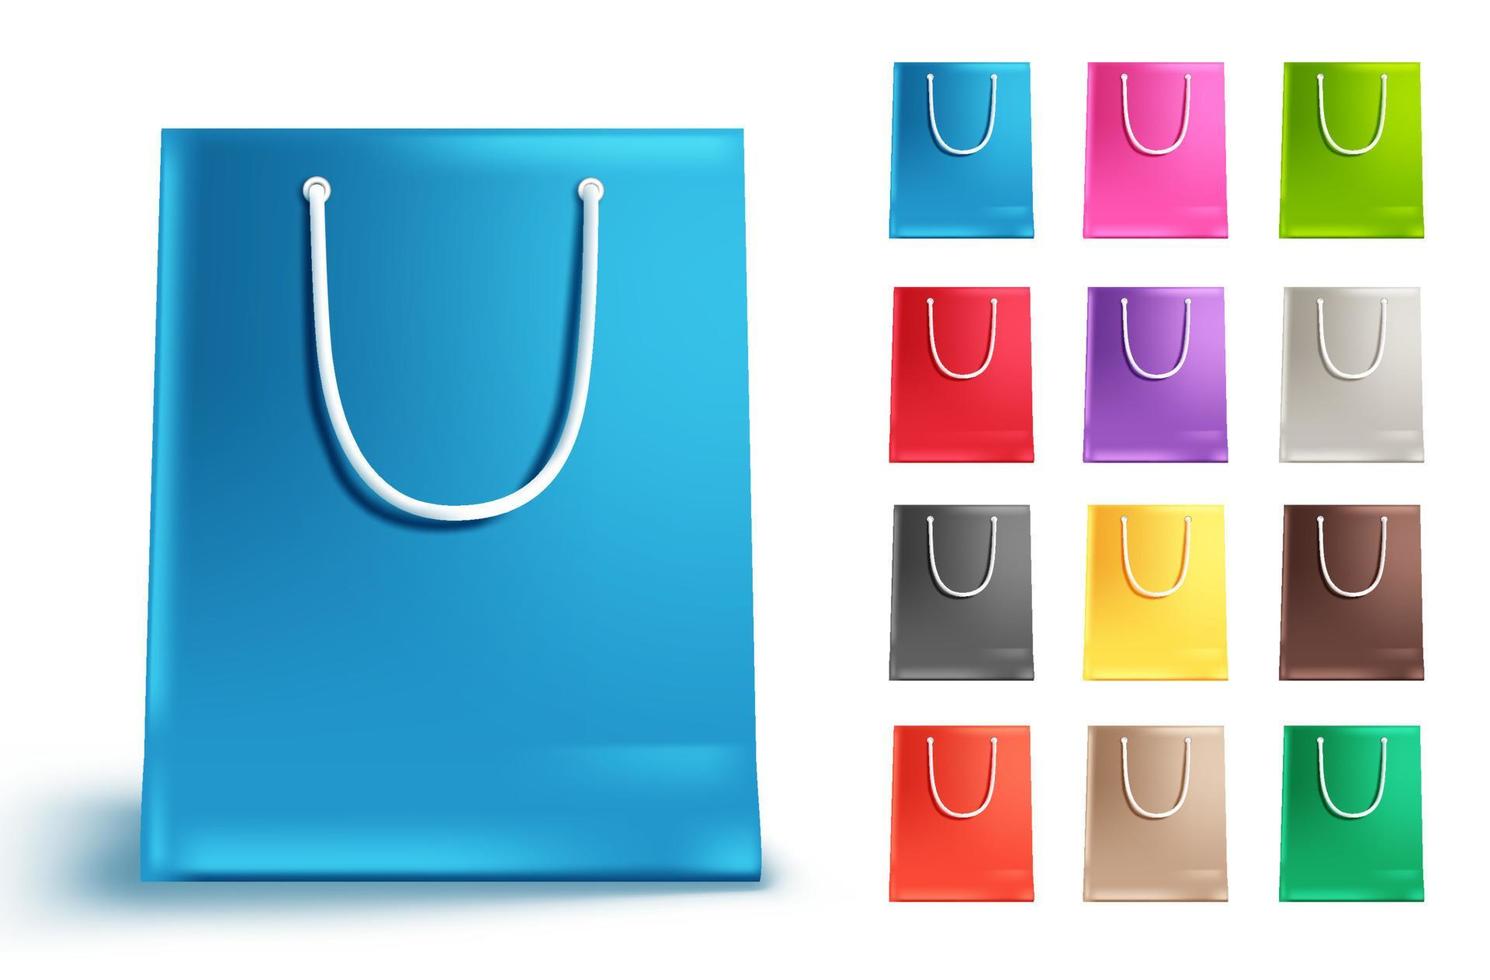 Shopping bags vector set isolated in white. Colorful paper bag collection with blue and other colors for shopping and market design elements. Vector illustration.